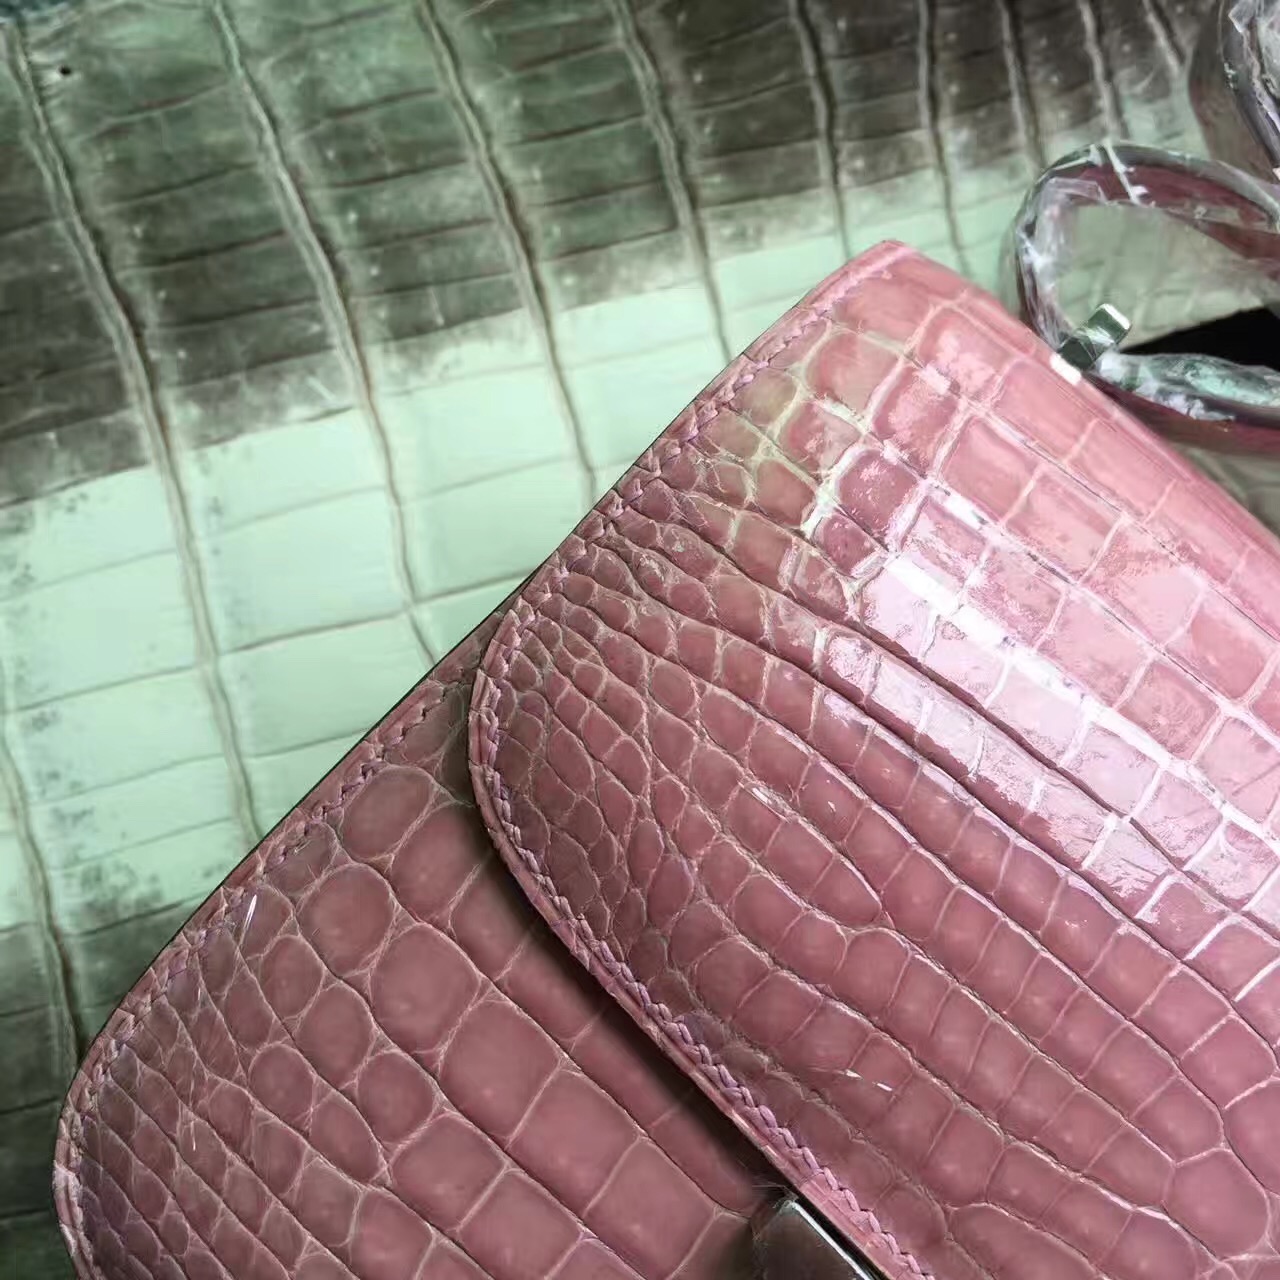 New Arrival Hermes Crocodile Shiny Leather Constance Bag18cm in Light Pink